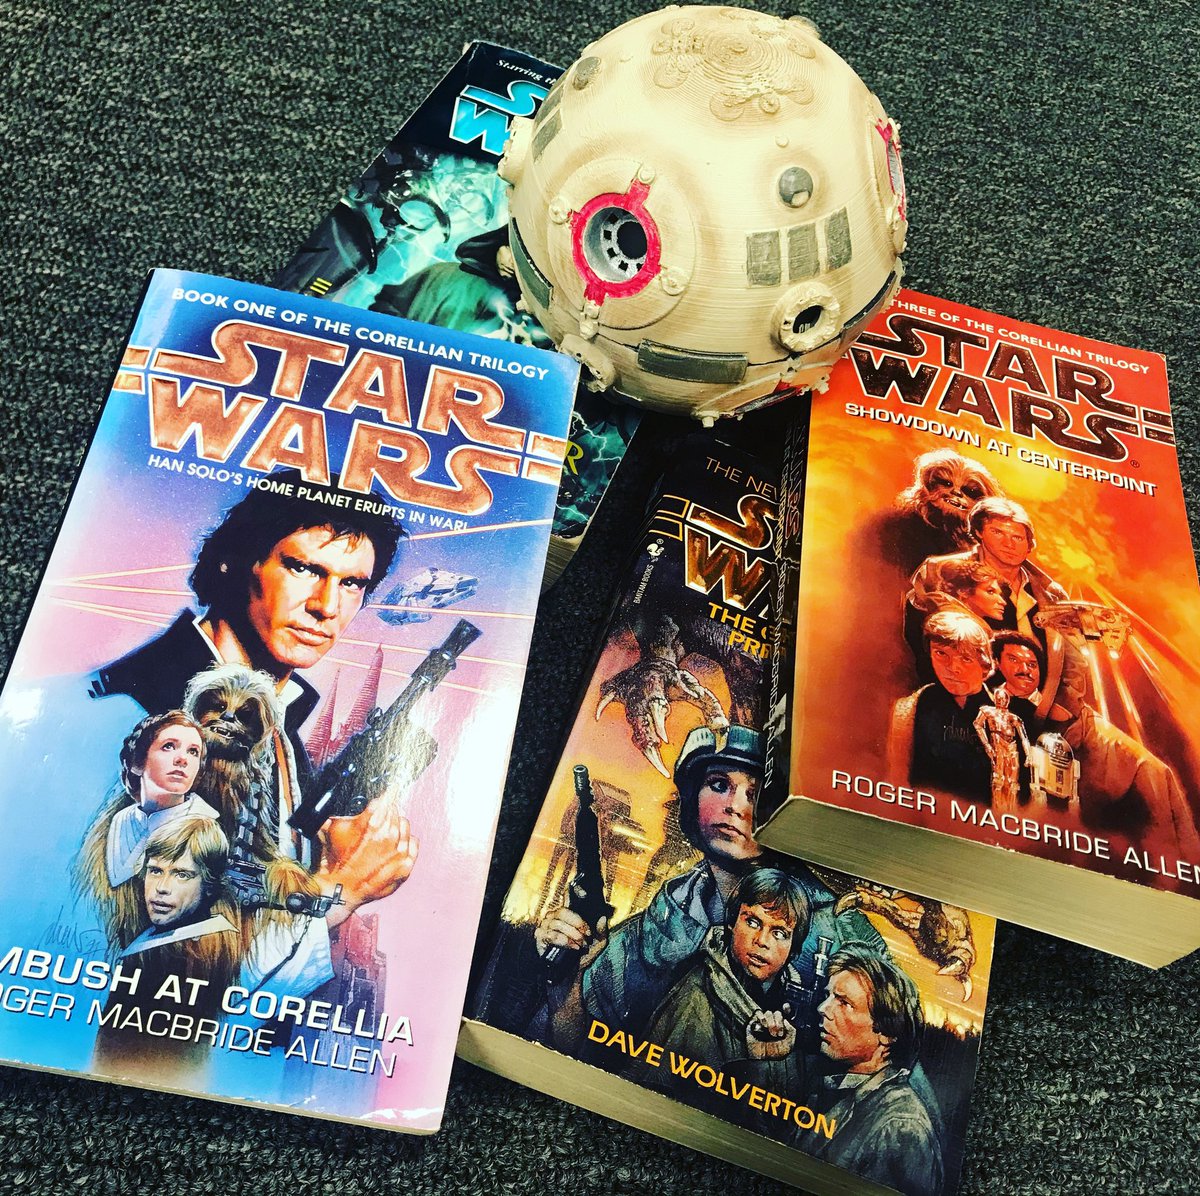 Those older #StarWars books are great. What’s one of your favorite stories from back in the day?